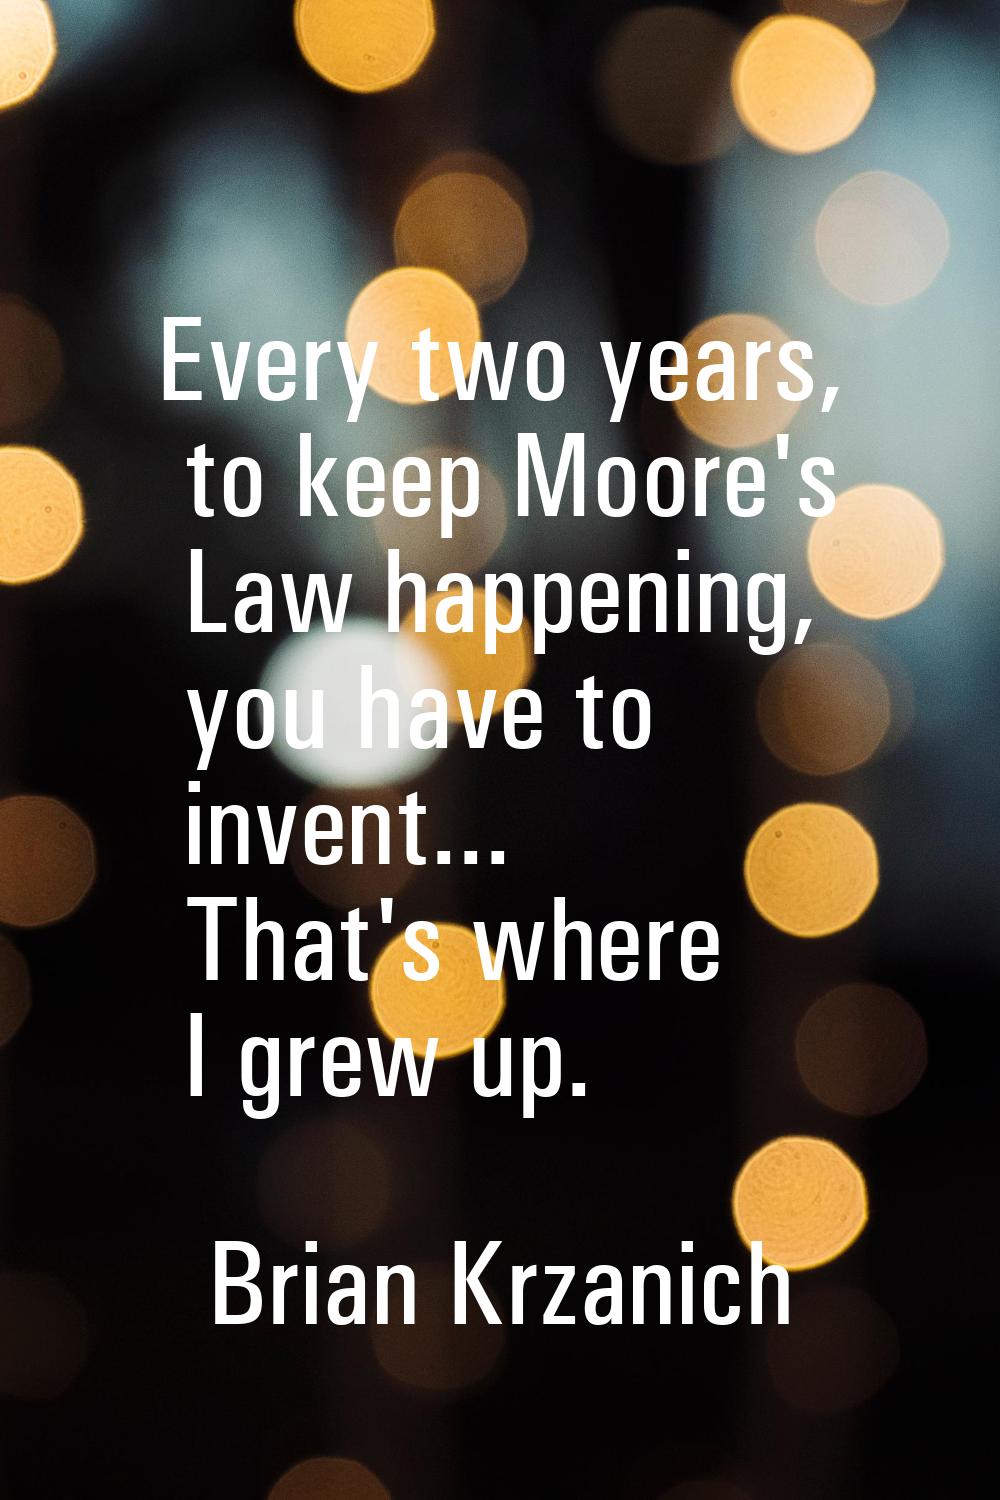 Every two years, to keep Moore's Law happening, you have to invent... That's where I grew up.